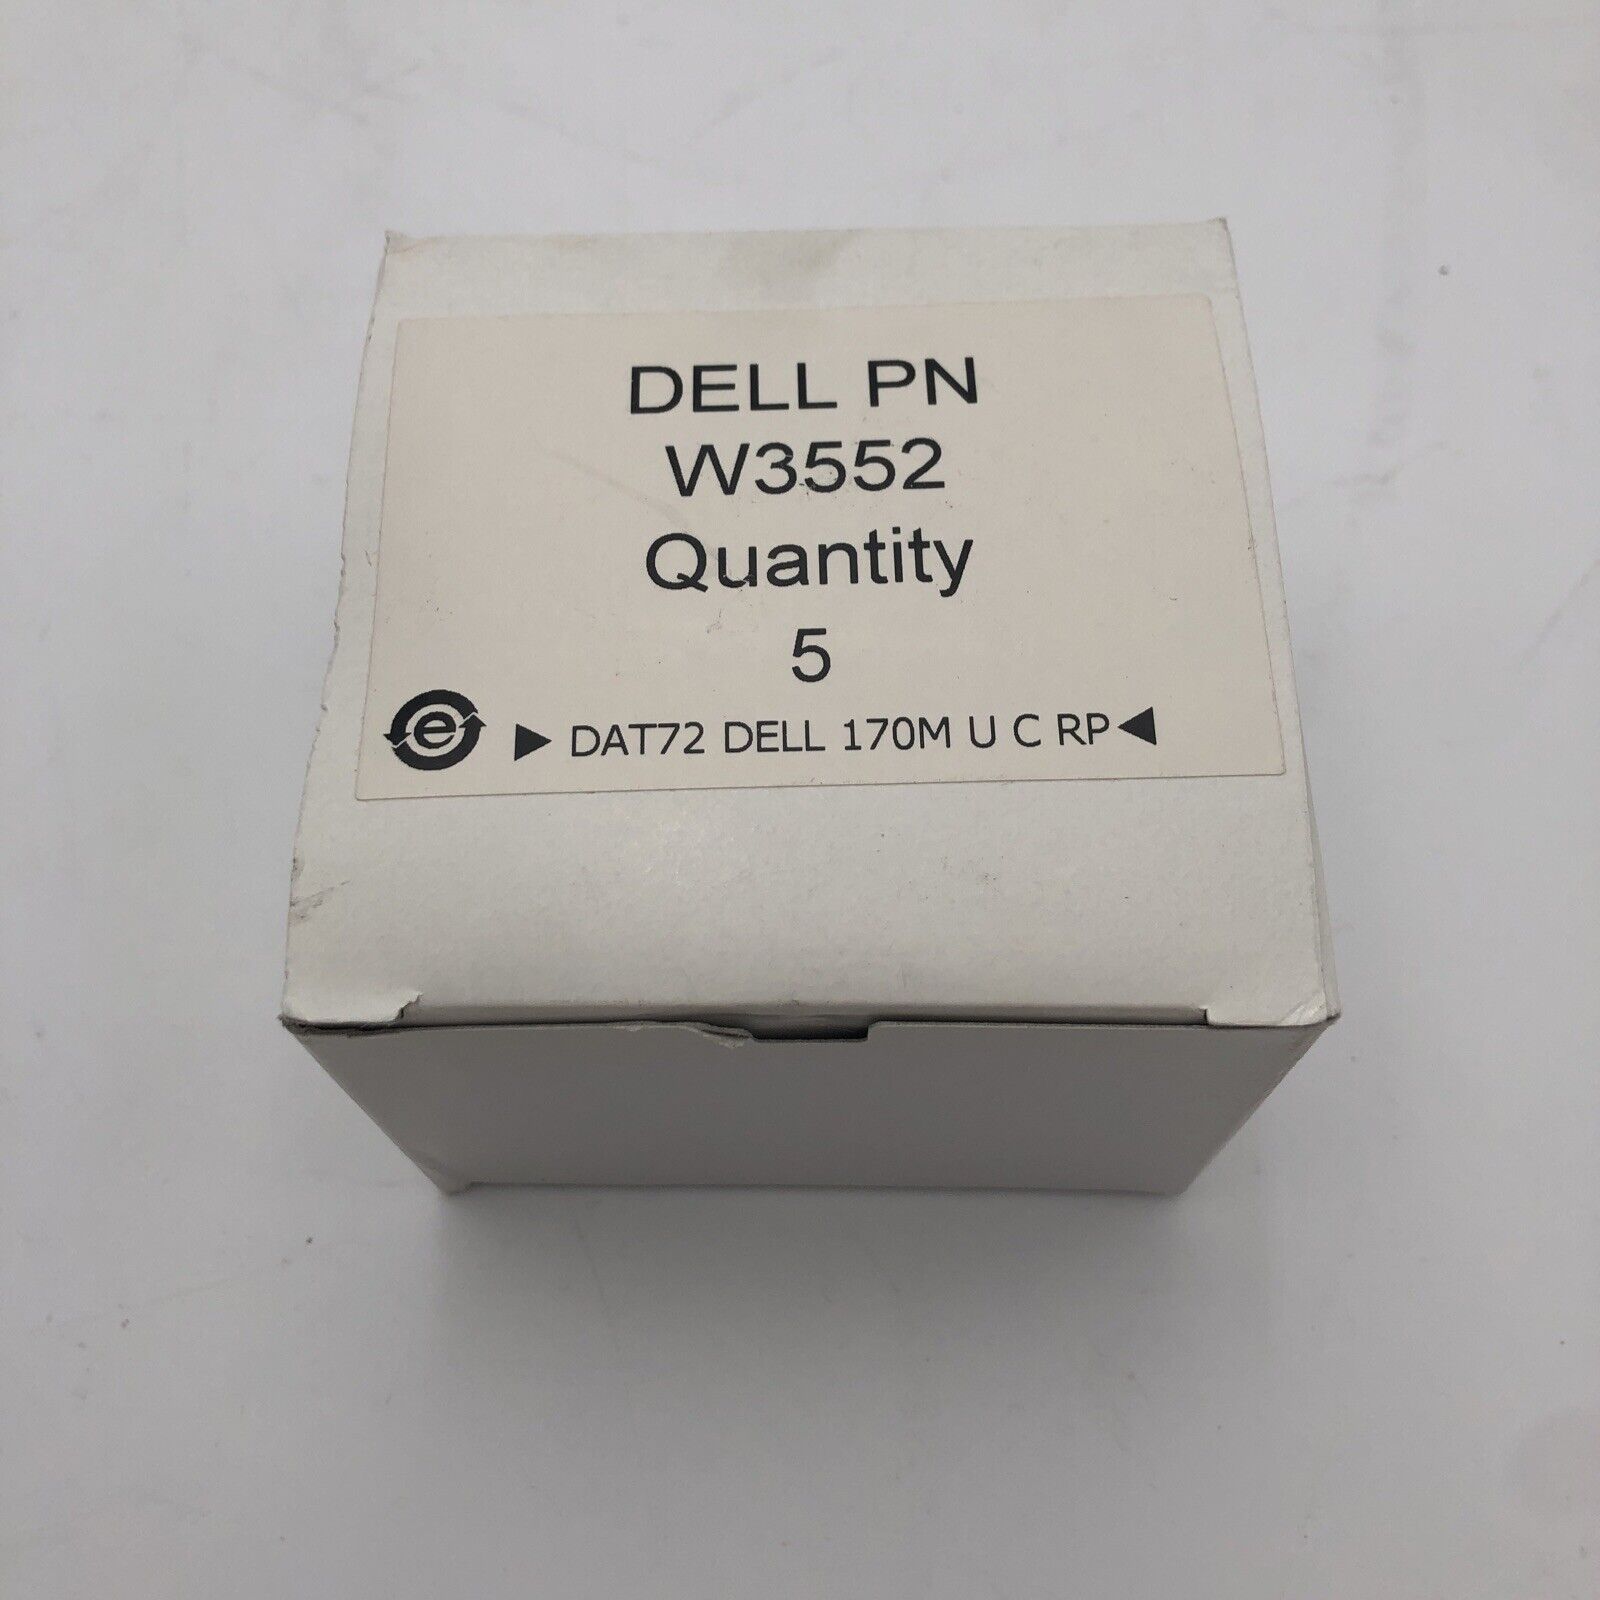 NOS BOX OF 5 Dell DAT72 170M 36GB/72GB 4mm Backup Data Tape Cartridges 0W3552